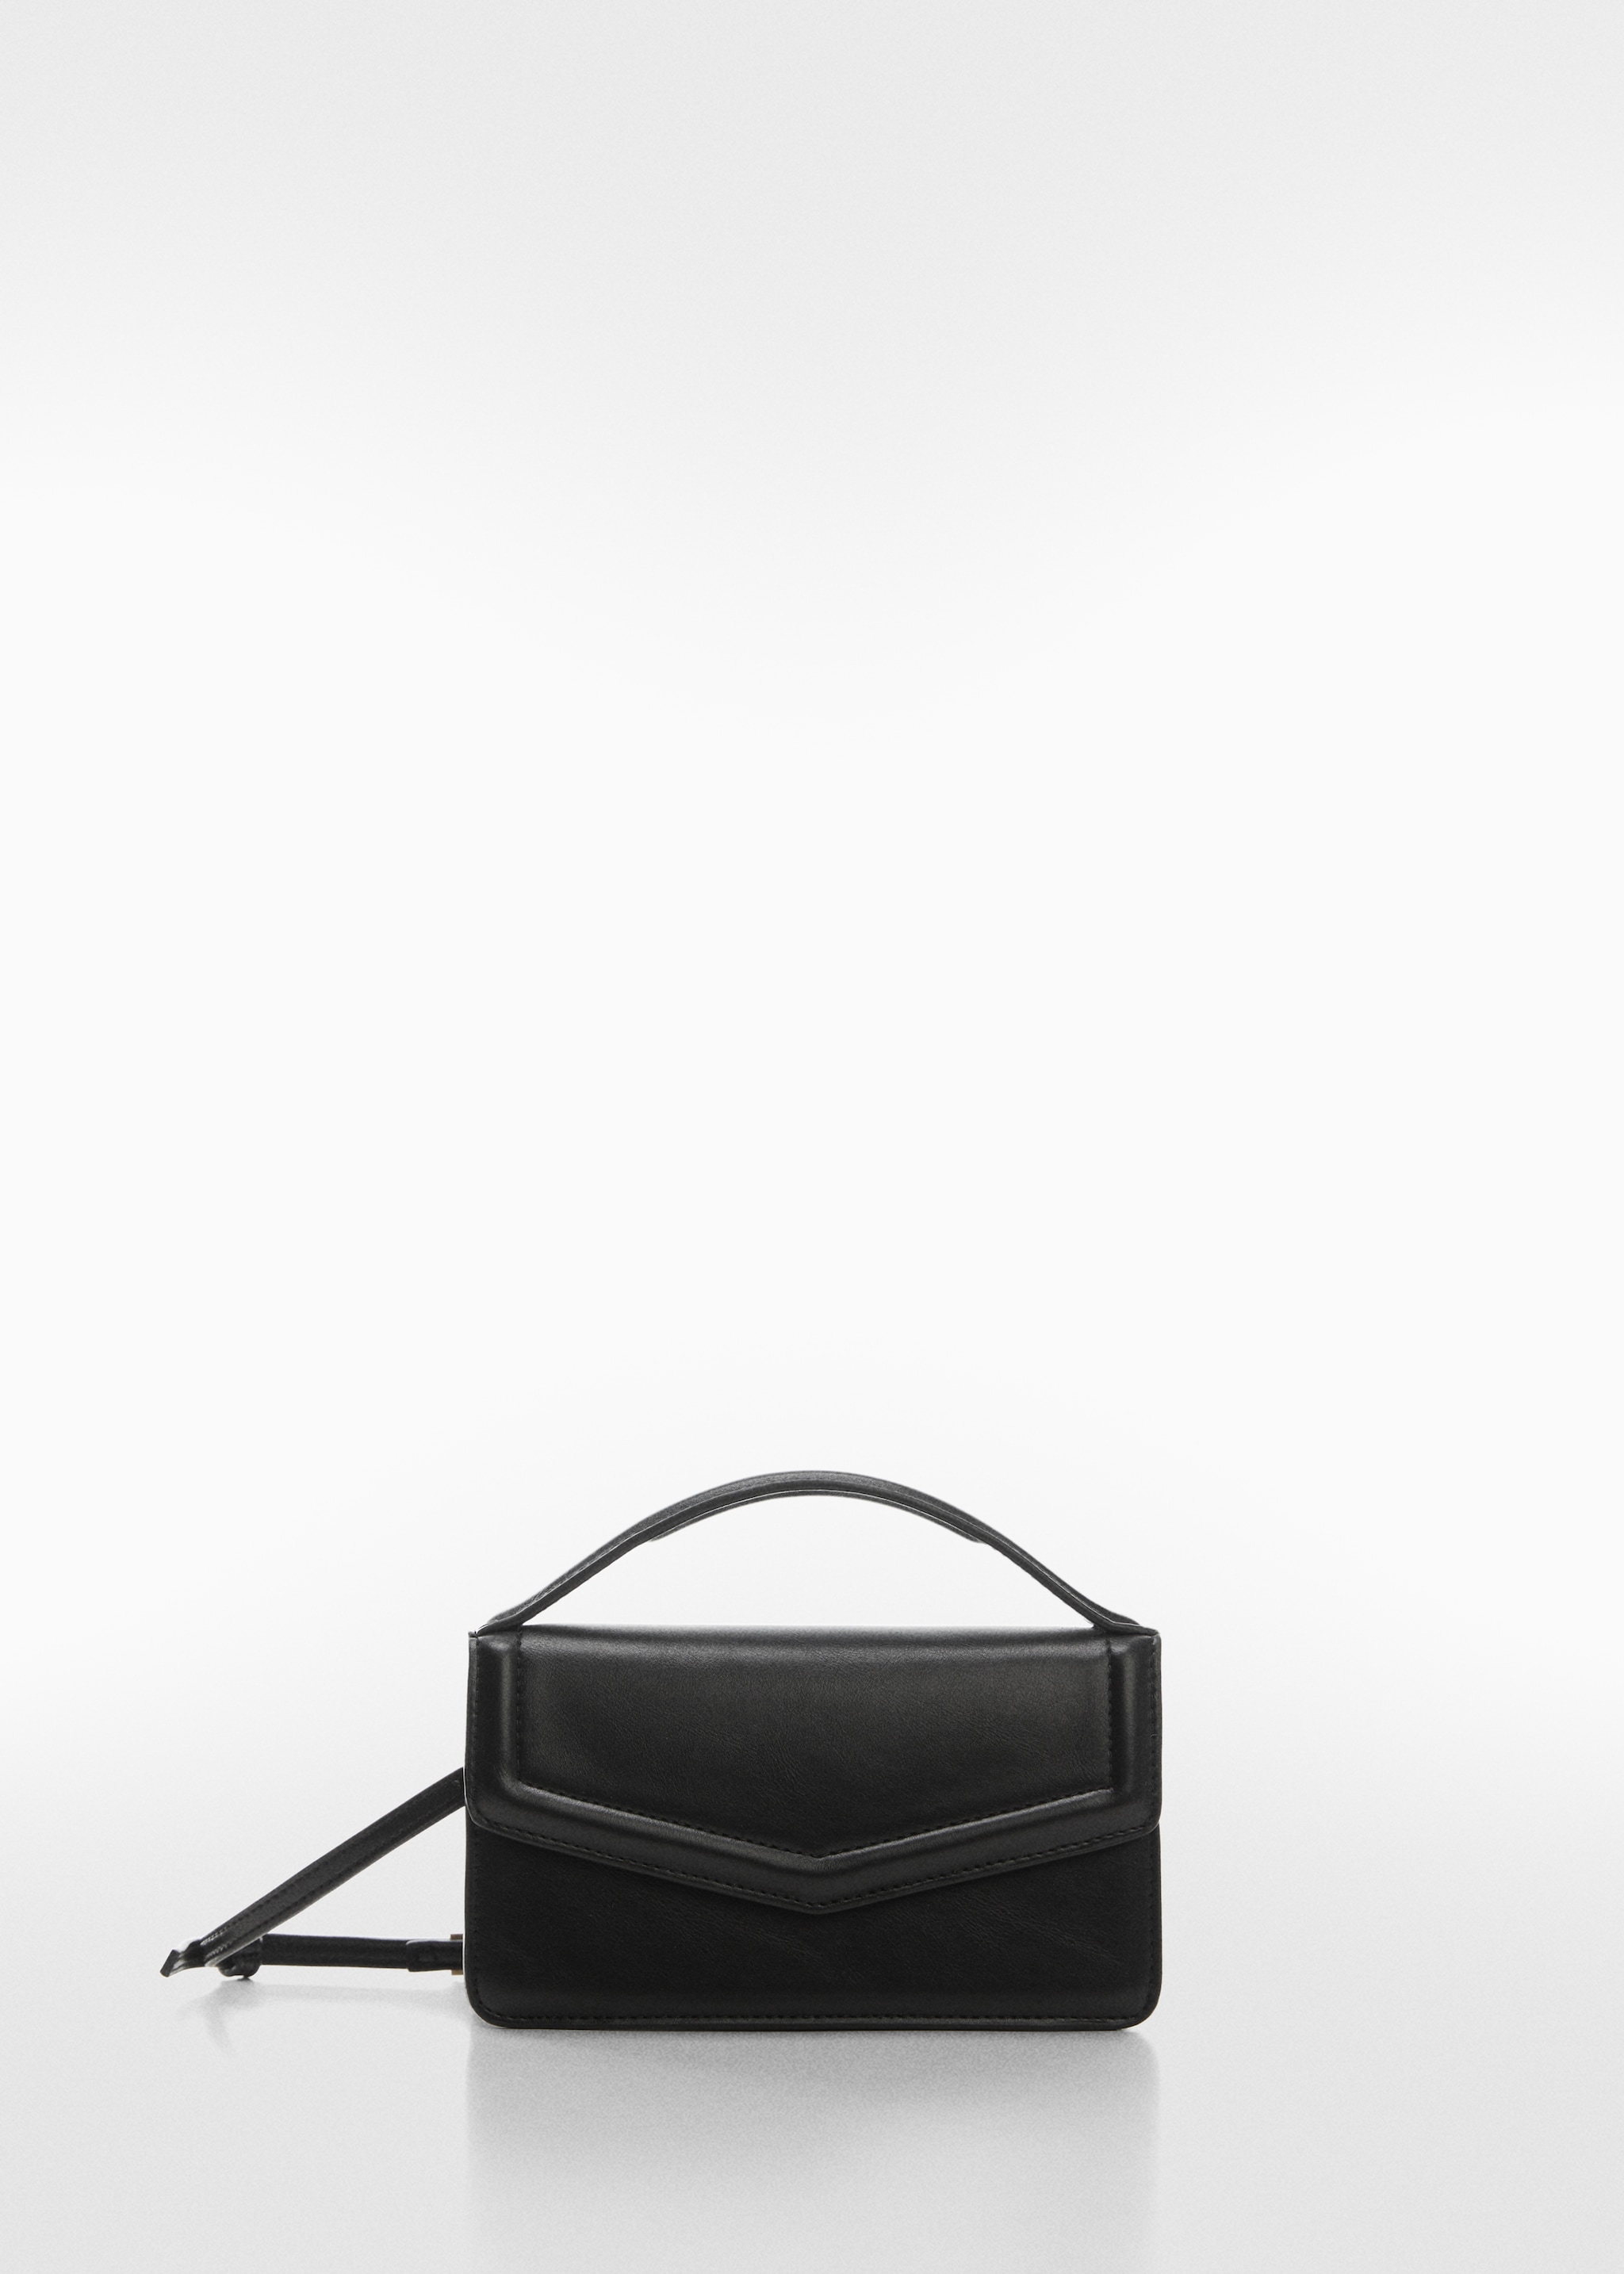 Rectangular bag with flap - Article without model